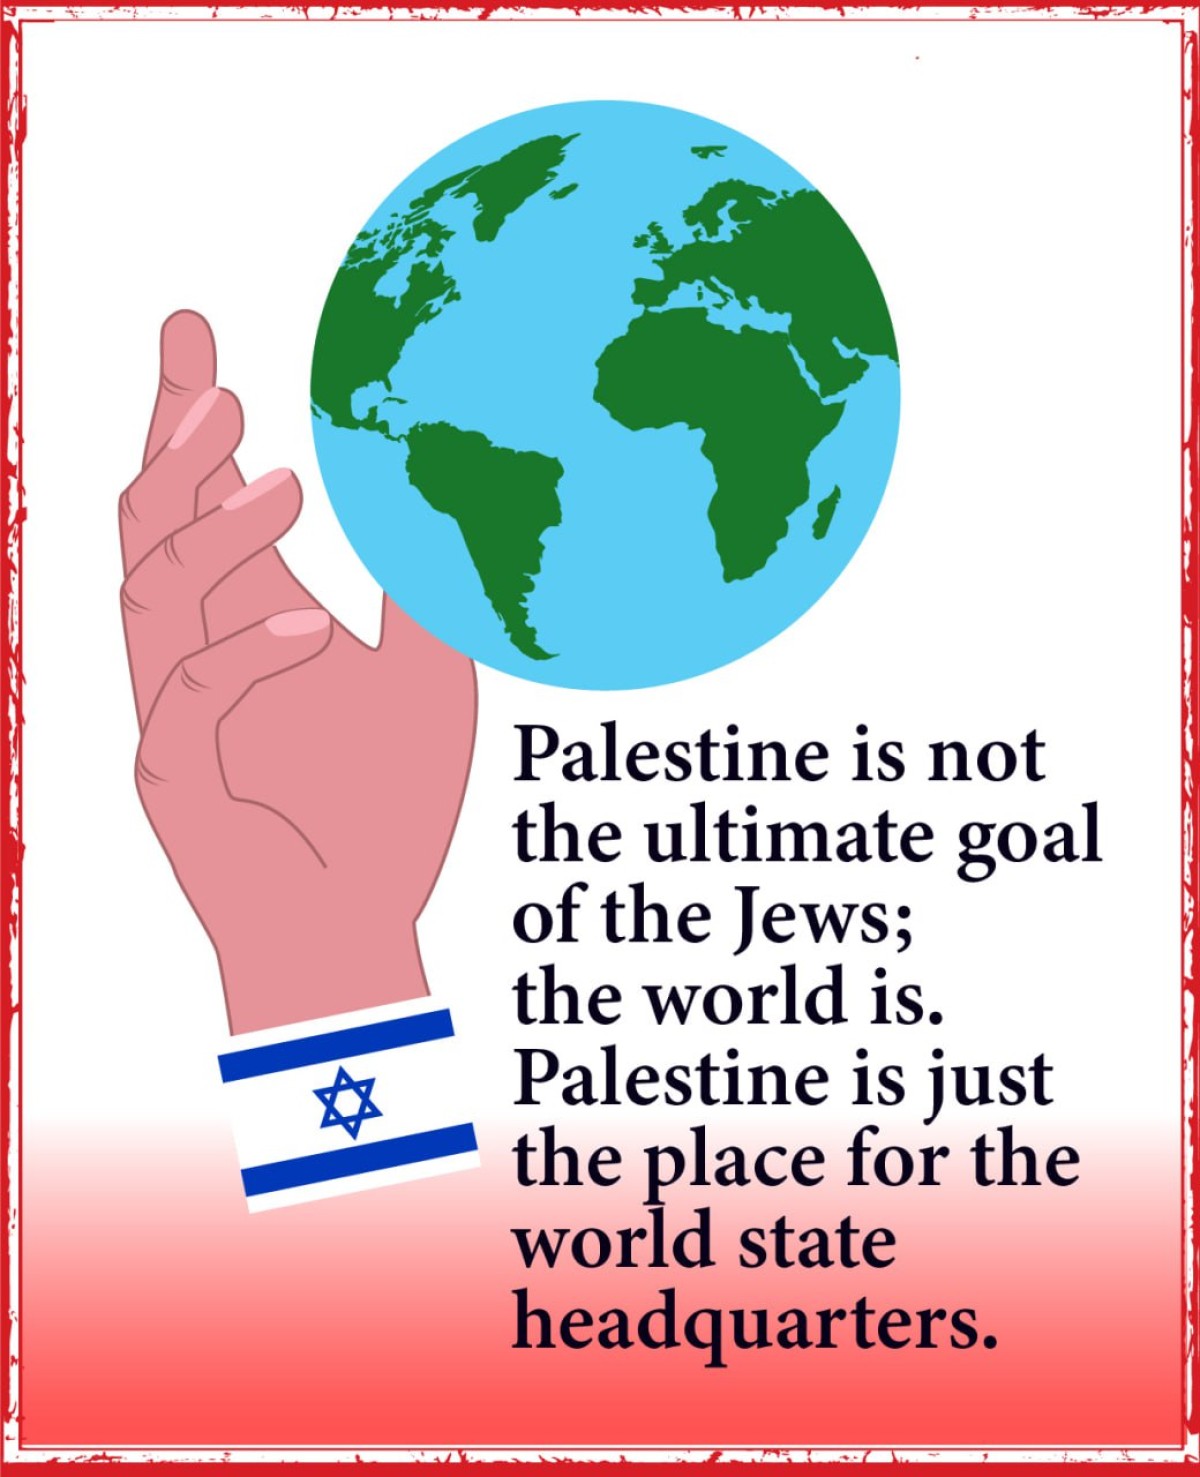 Palestine is not the ultimate goal of the Jews; the world is. Palestine is just the place for the world state headquarters.